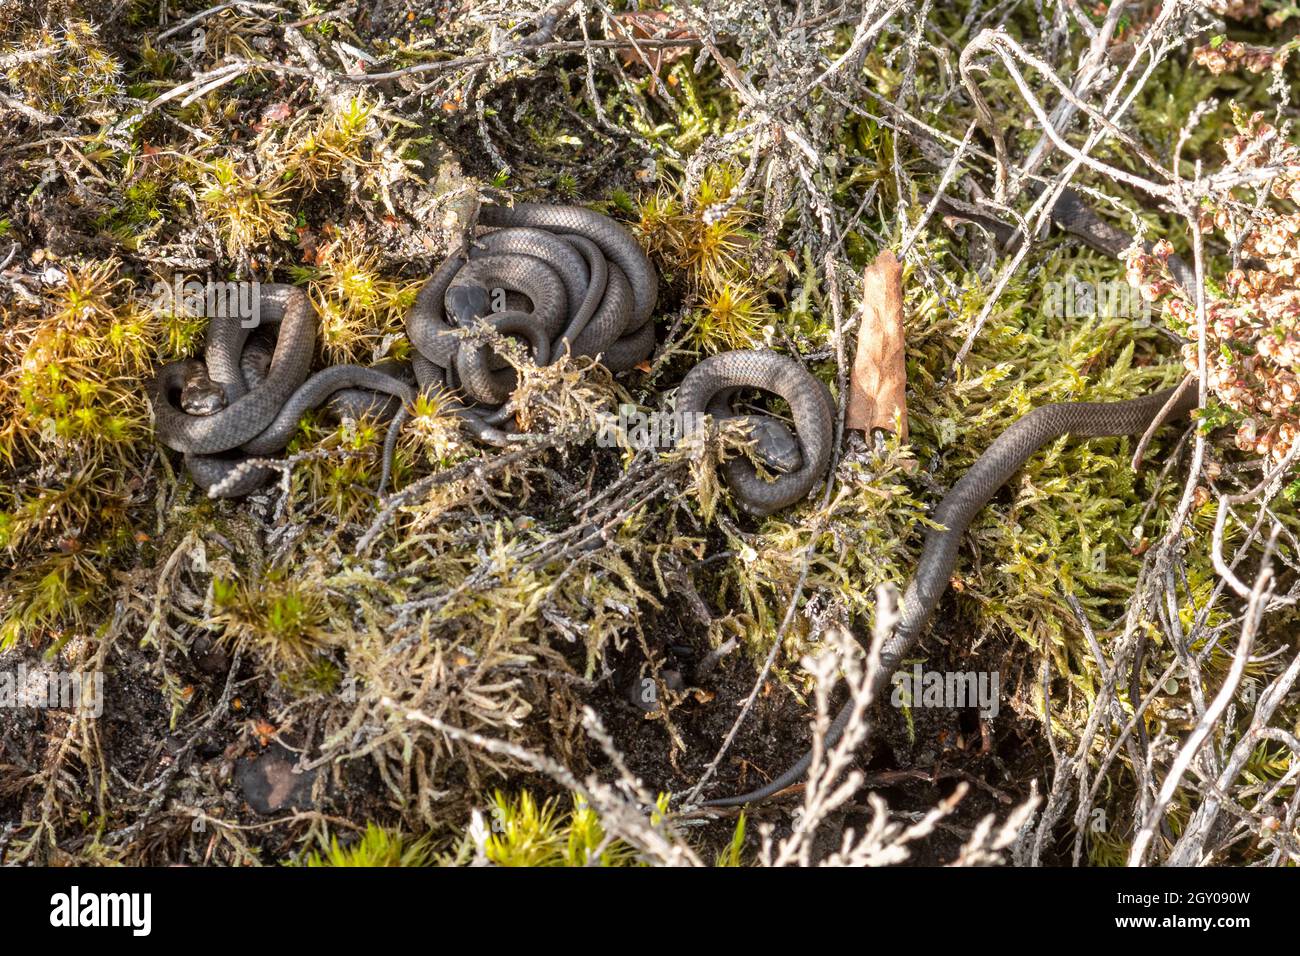 Neonate baby smooth snakes (Coronella austriaca), a rare reptile species, basking together in natural heathland habitat in Surrey, England, UK Stock Photo